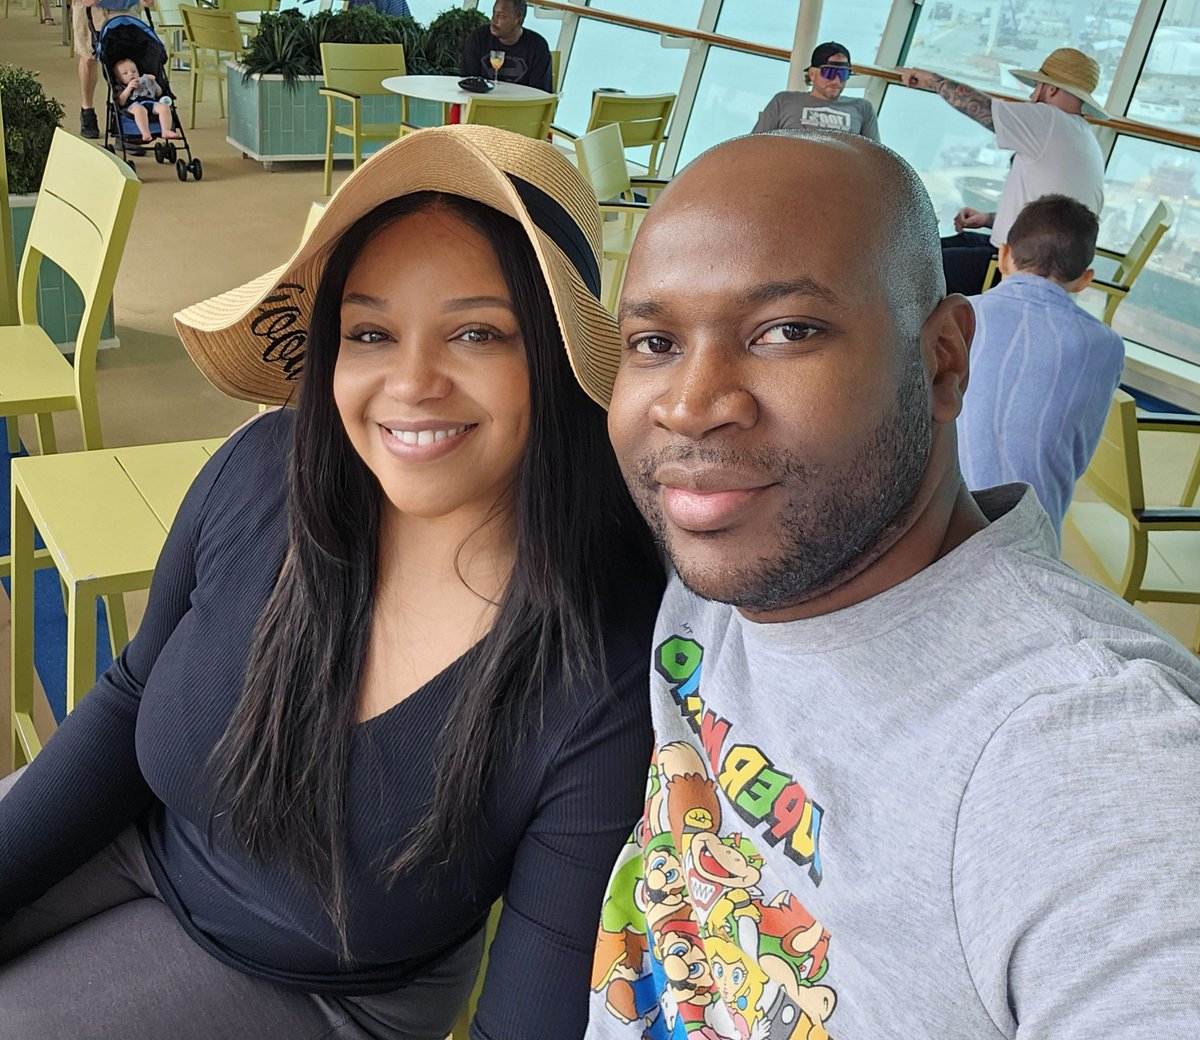 Five years of smooth sailing (and maybe a few rough patches ) with the love of my life! Ready to enjoy this cruise with my beautiful lady! ️ #cruiselife #anniversarylove